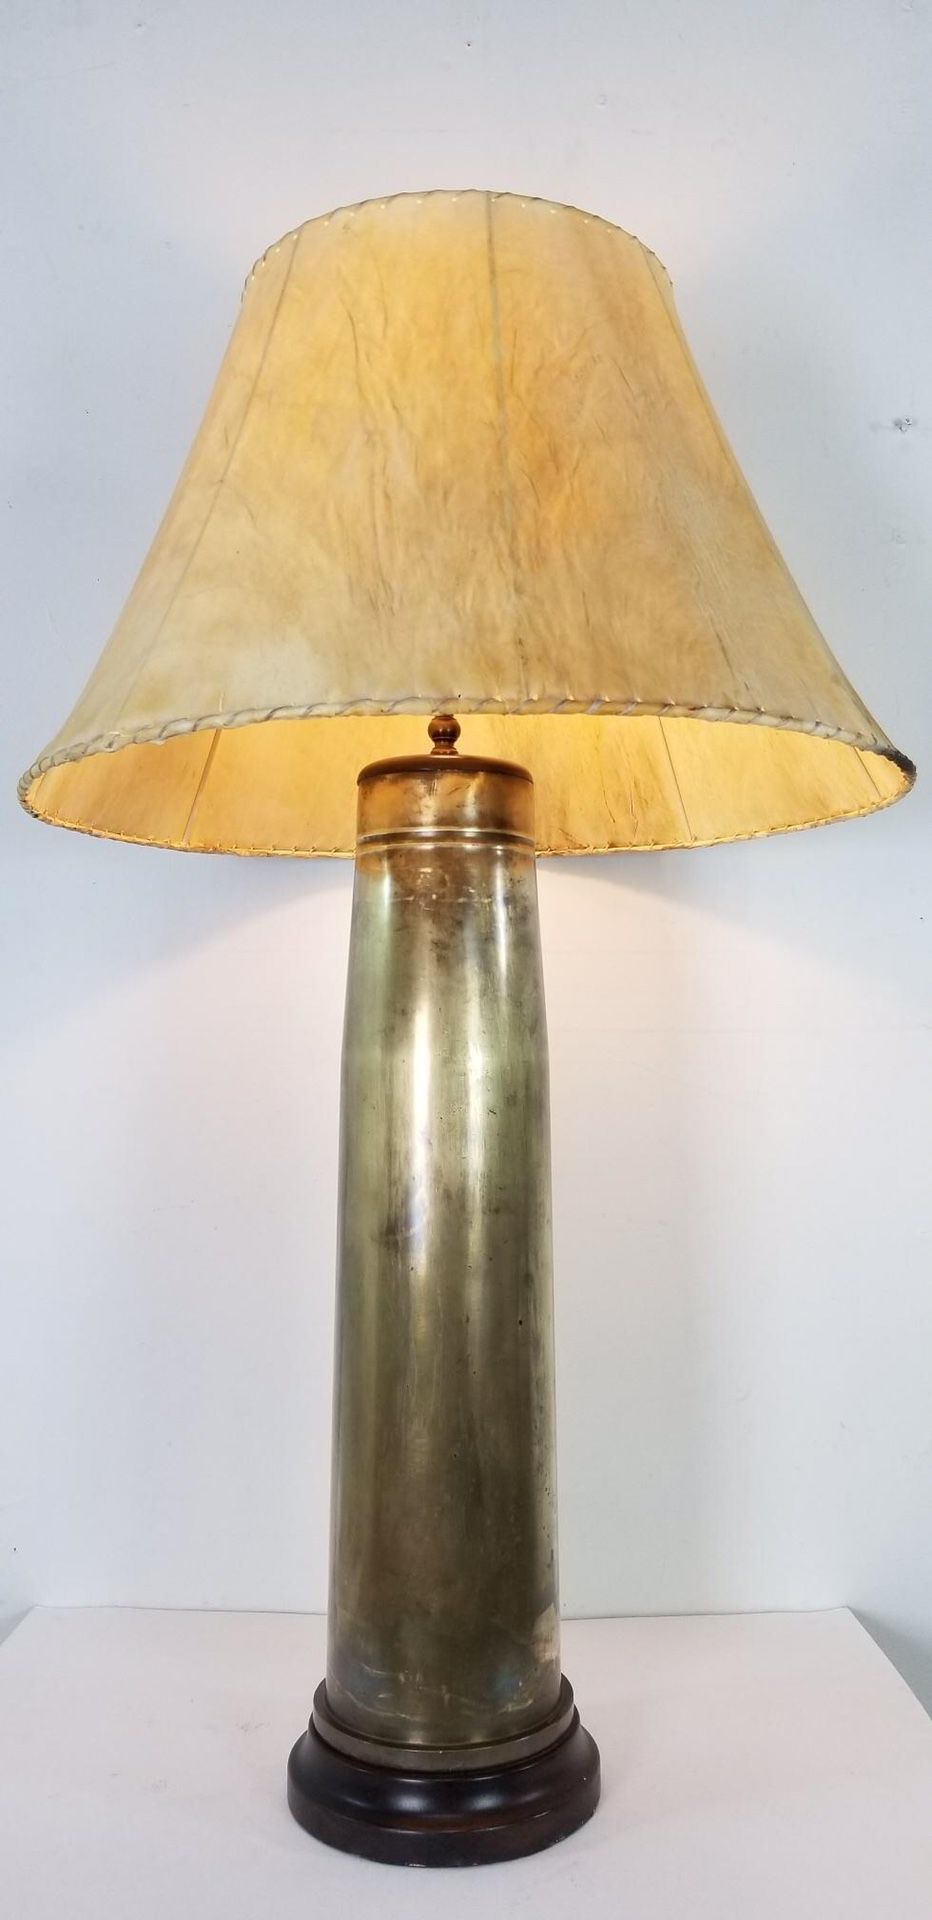 Antique Trench Artillery shell lamp